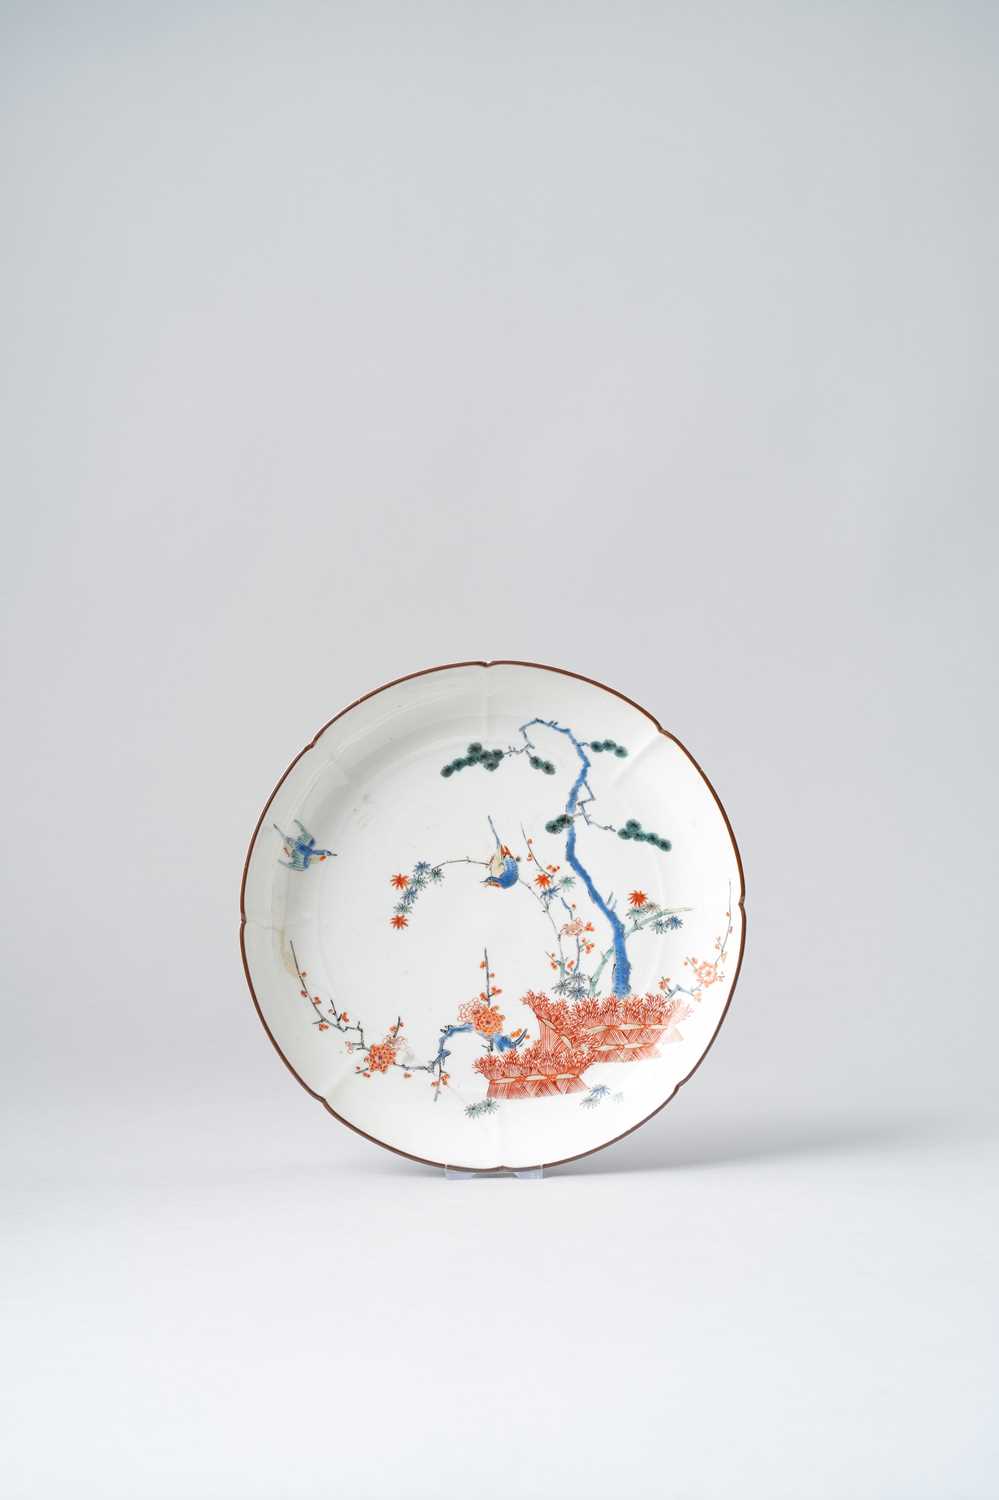 NO RESERVE A JAPANESE KAKIEMON LOBED DISH EDO PERIOD, 17TH CENTURY Decorated with two small